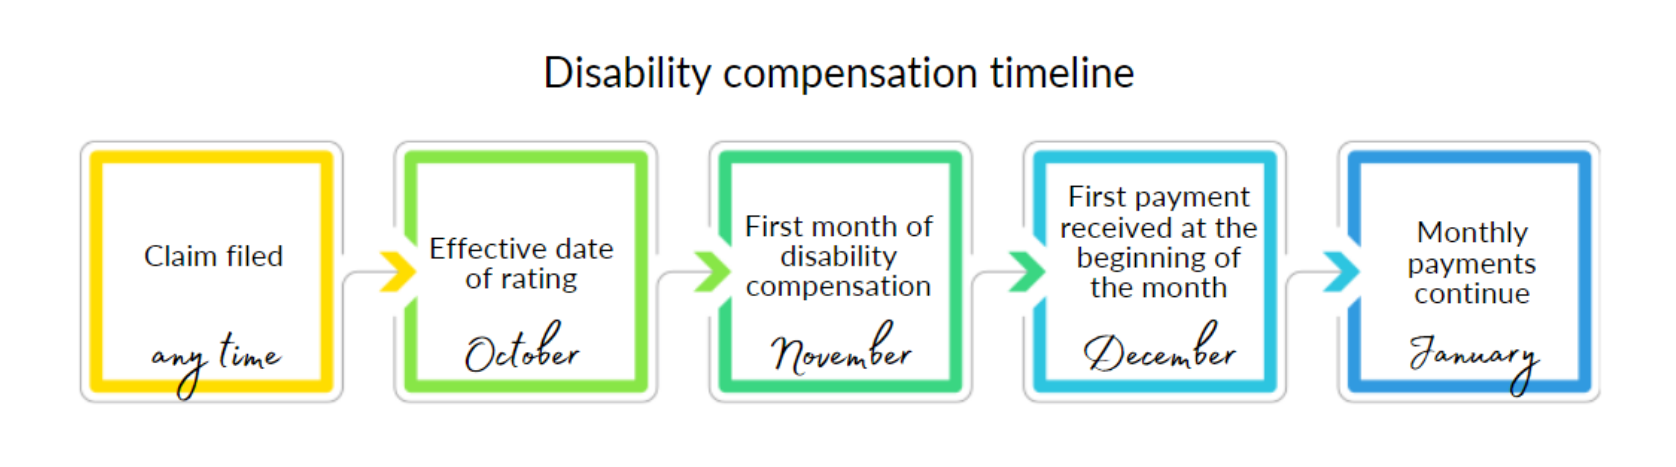 Disability Compensation Image2 ?width=1676&name=disability Compensation Image2 